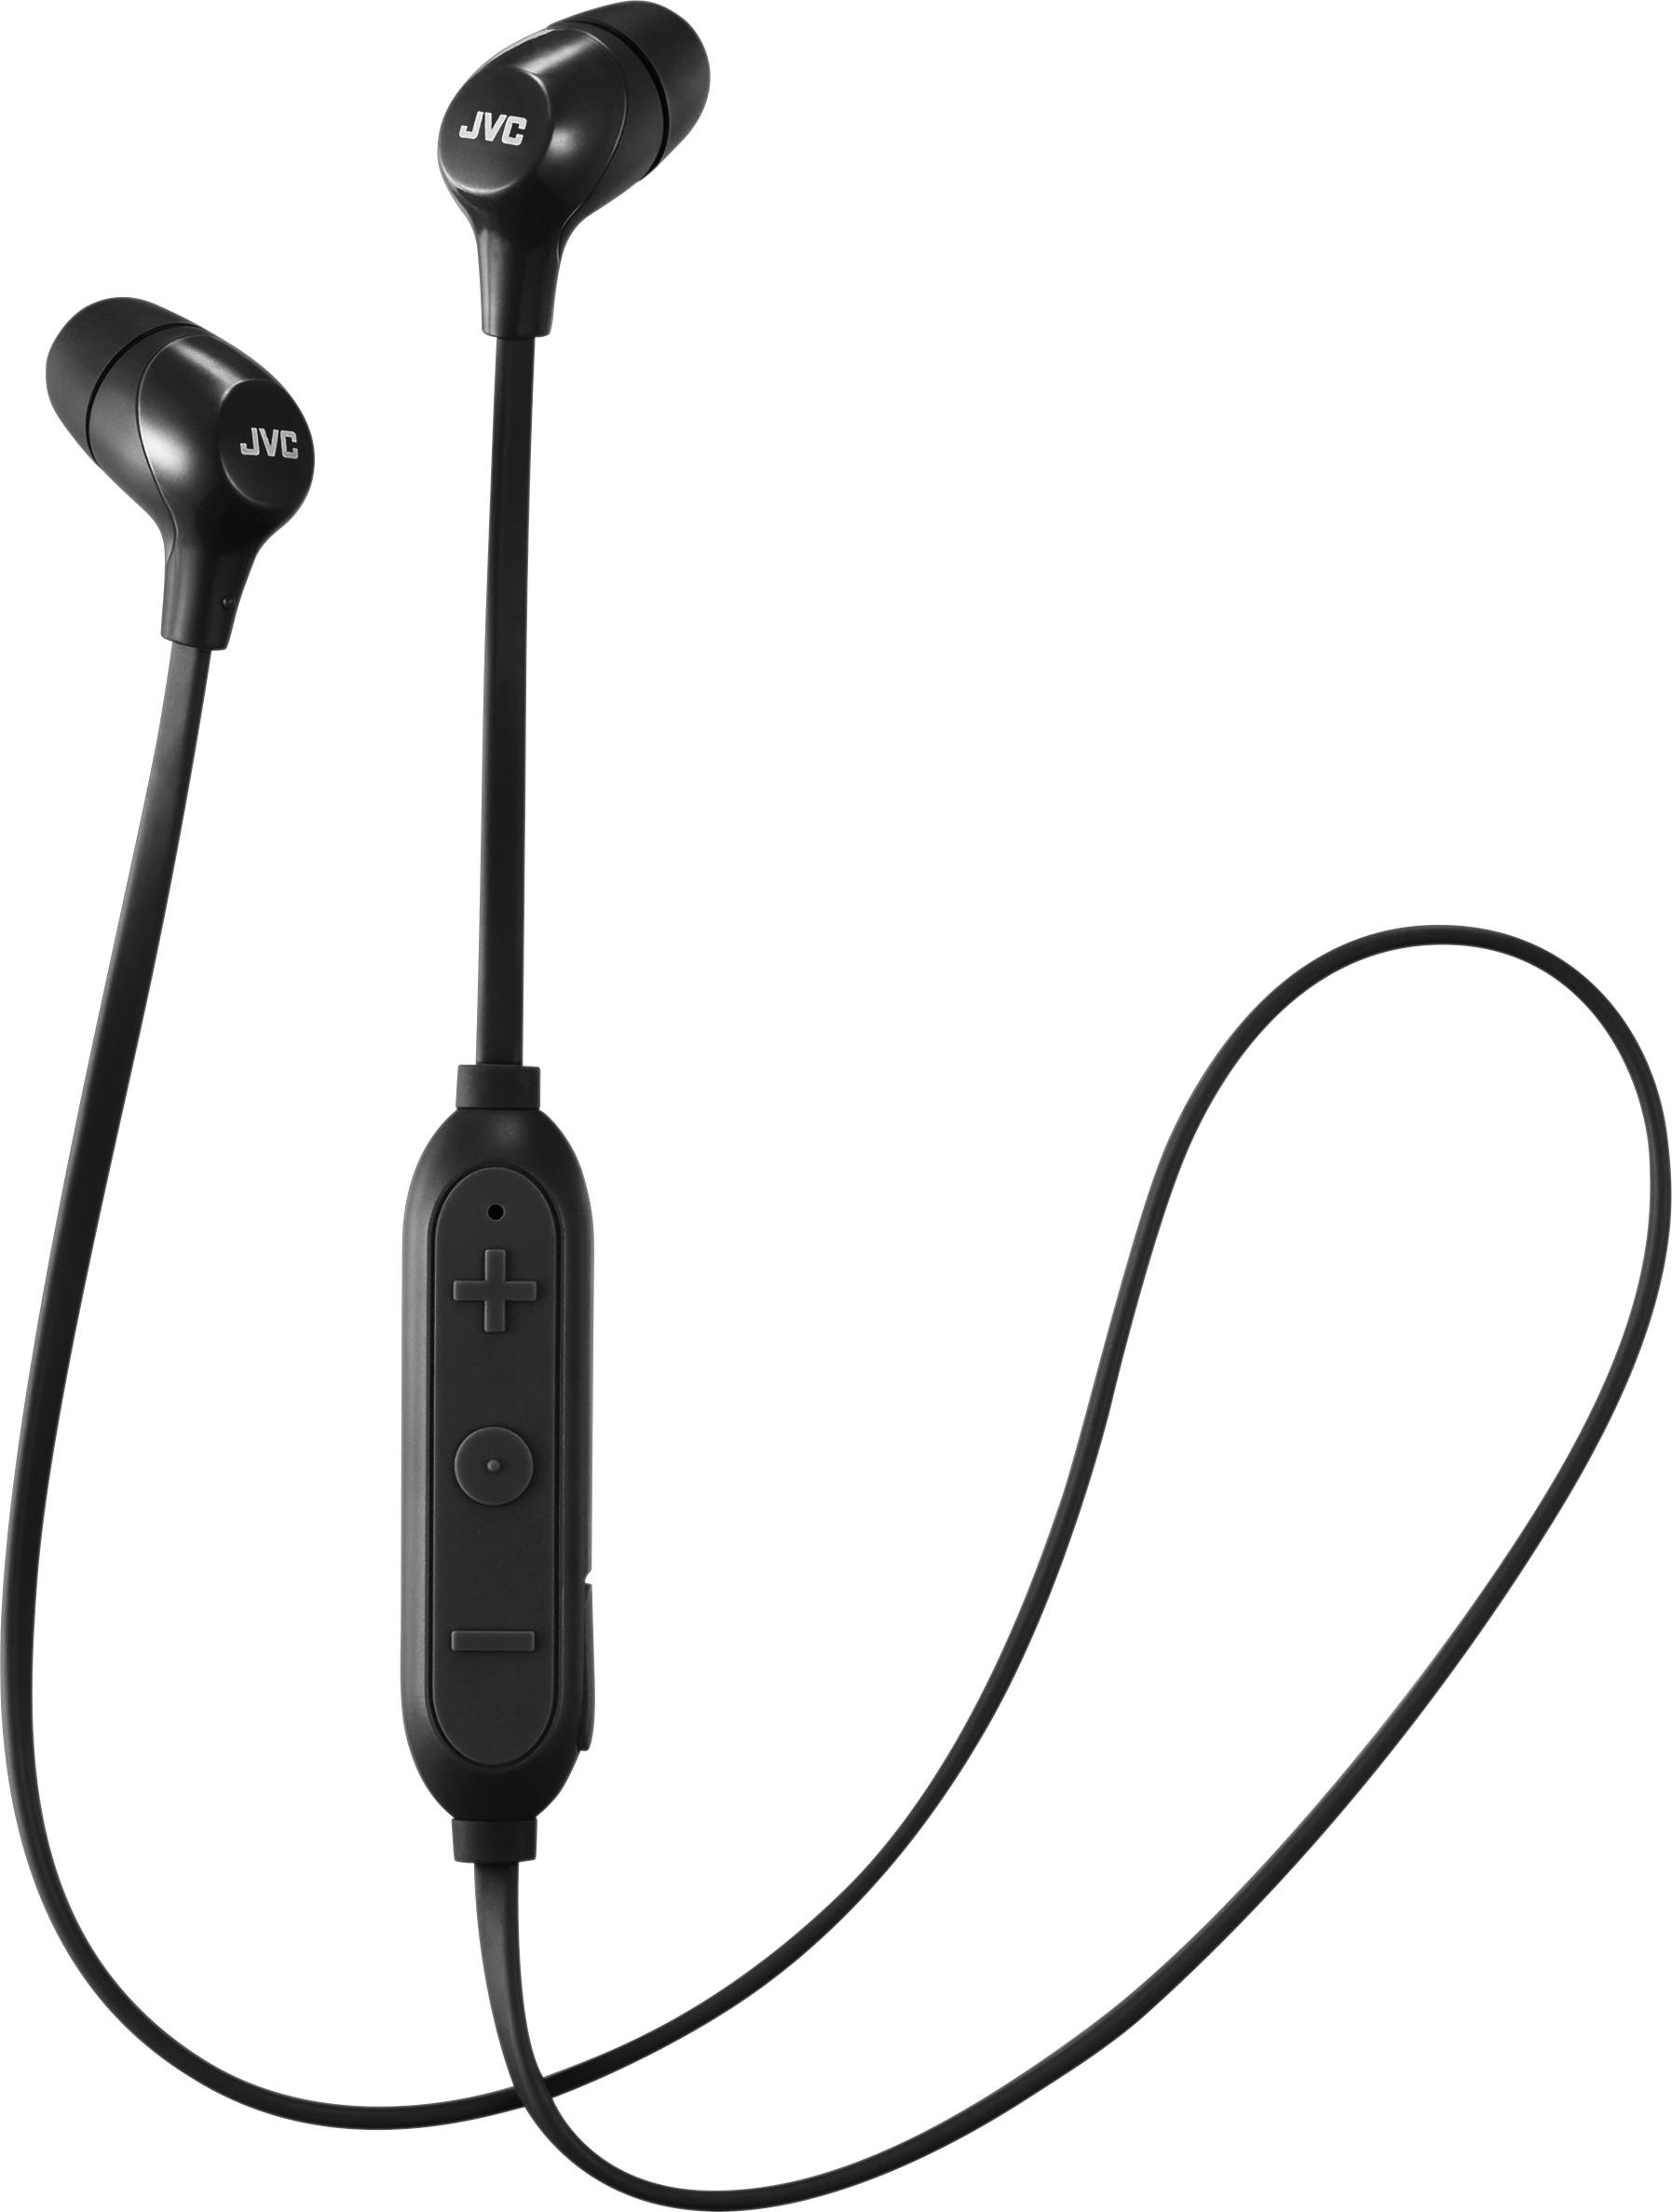 Angle View: Sony - SP600N Sports Wireless Noise Cancelling In-Ear Headphones - Blue